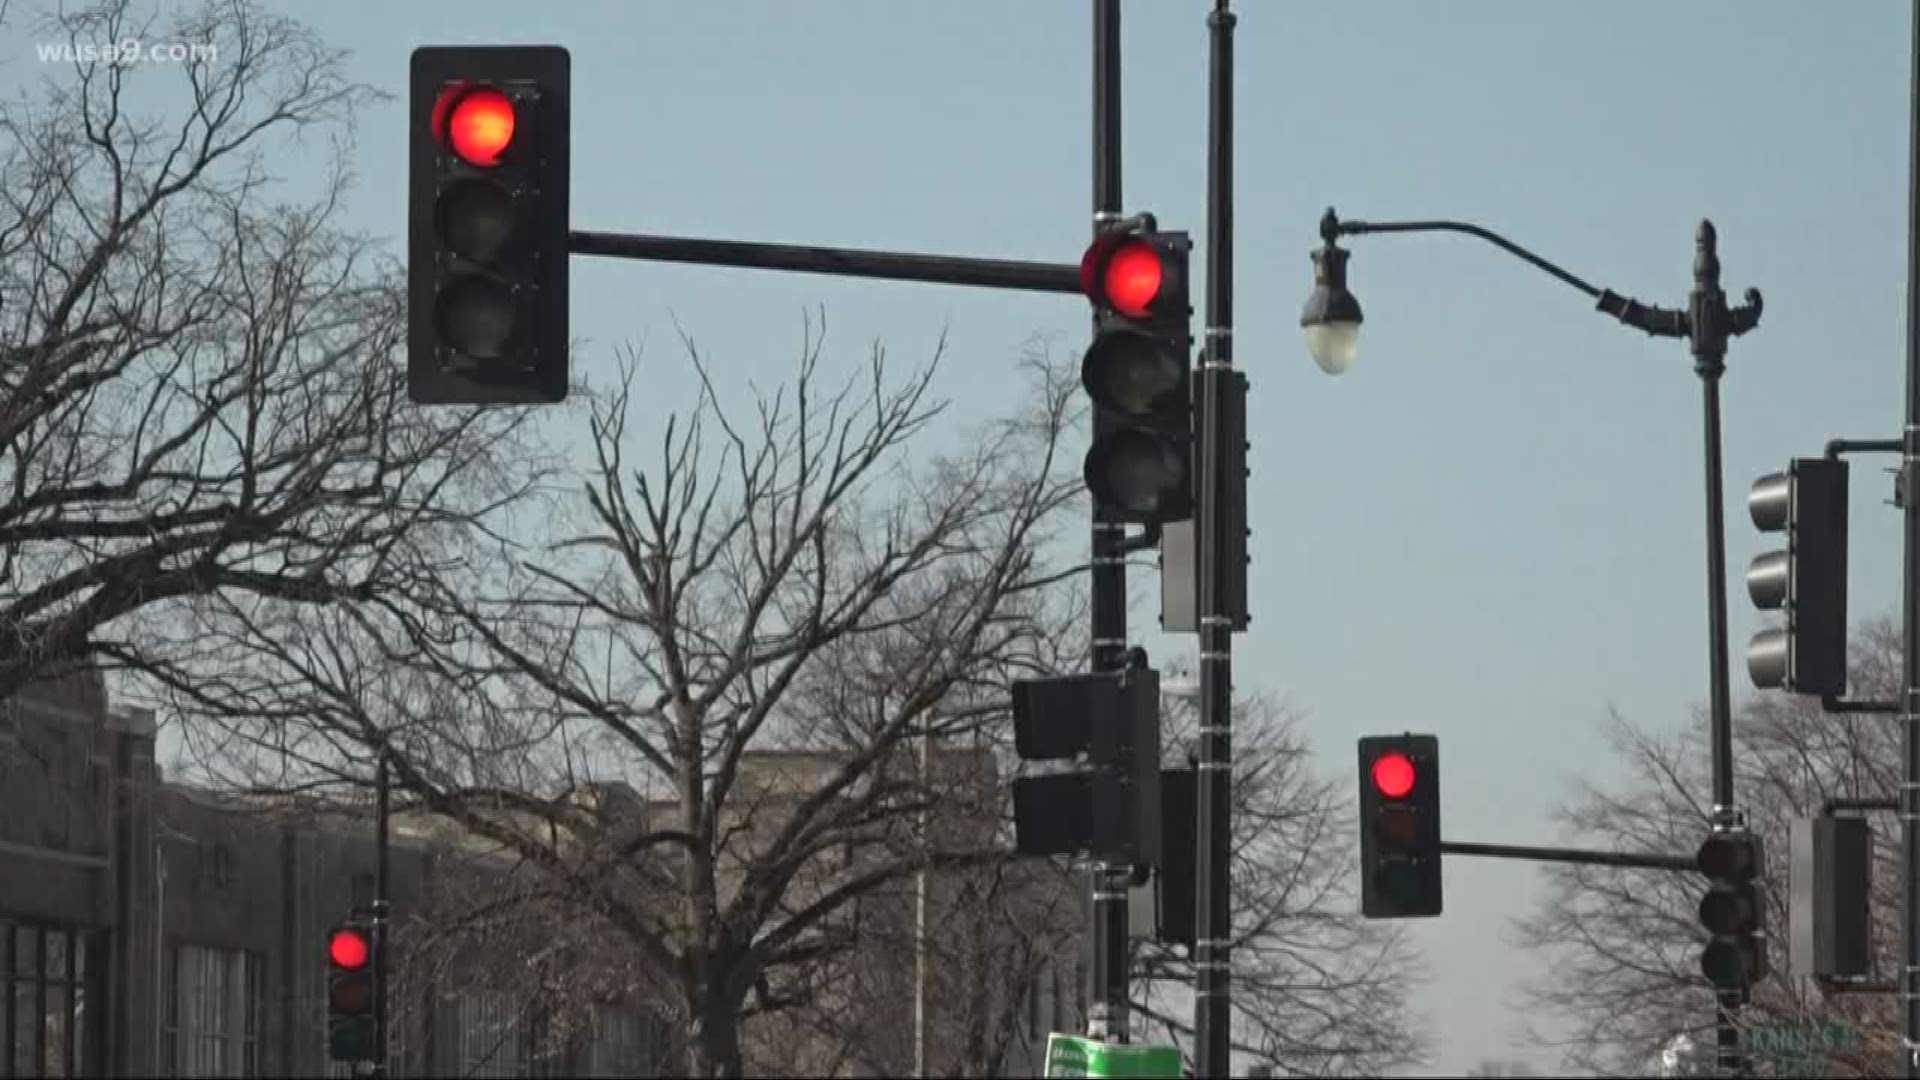 The District’s Department of Transportation says it will install "No Right Turn on Red" light signs at approximately 100 intersections in 2019.